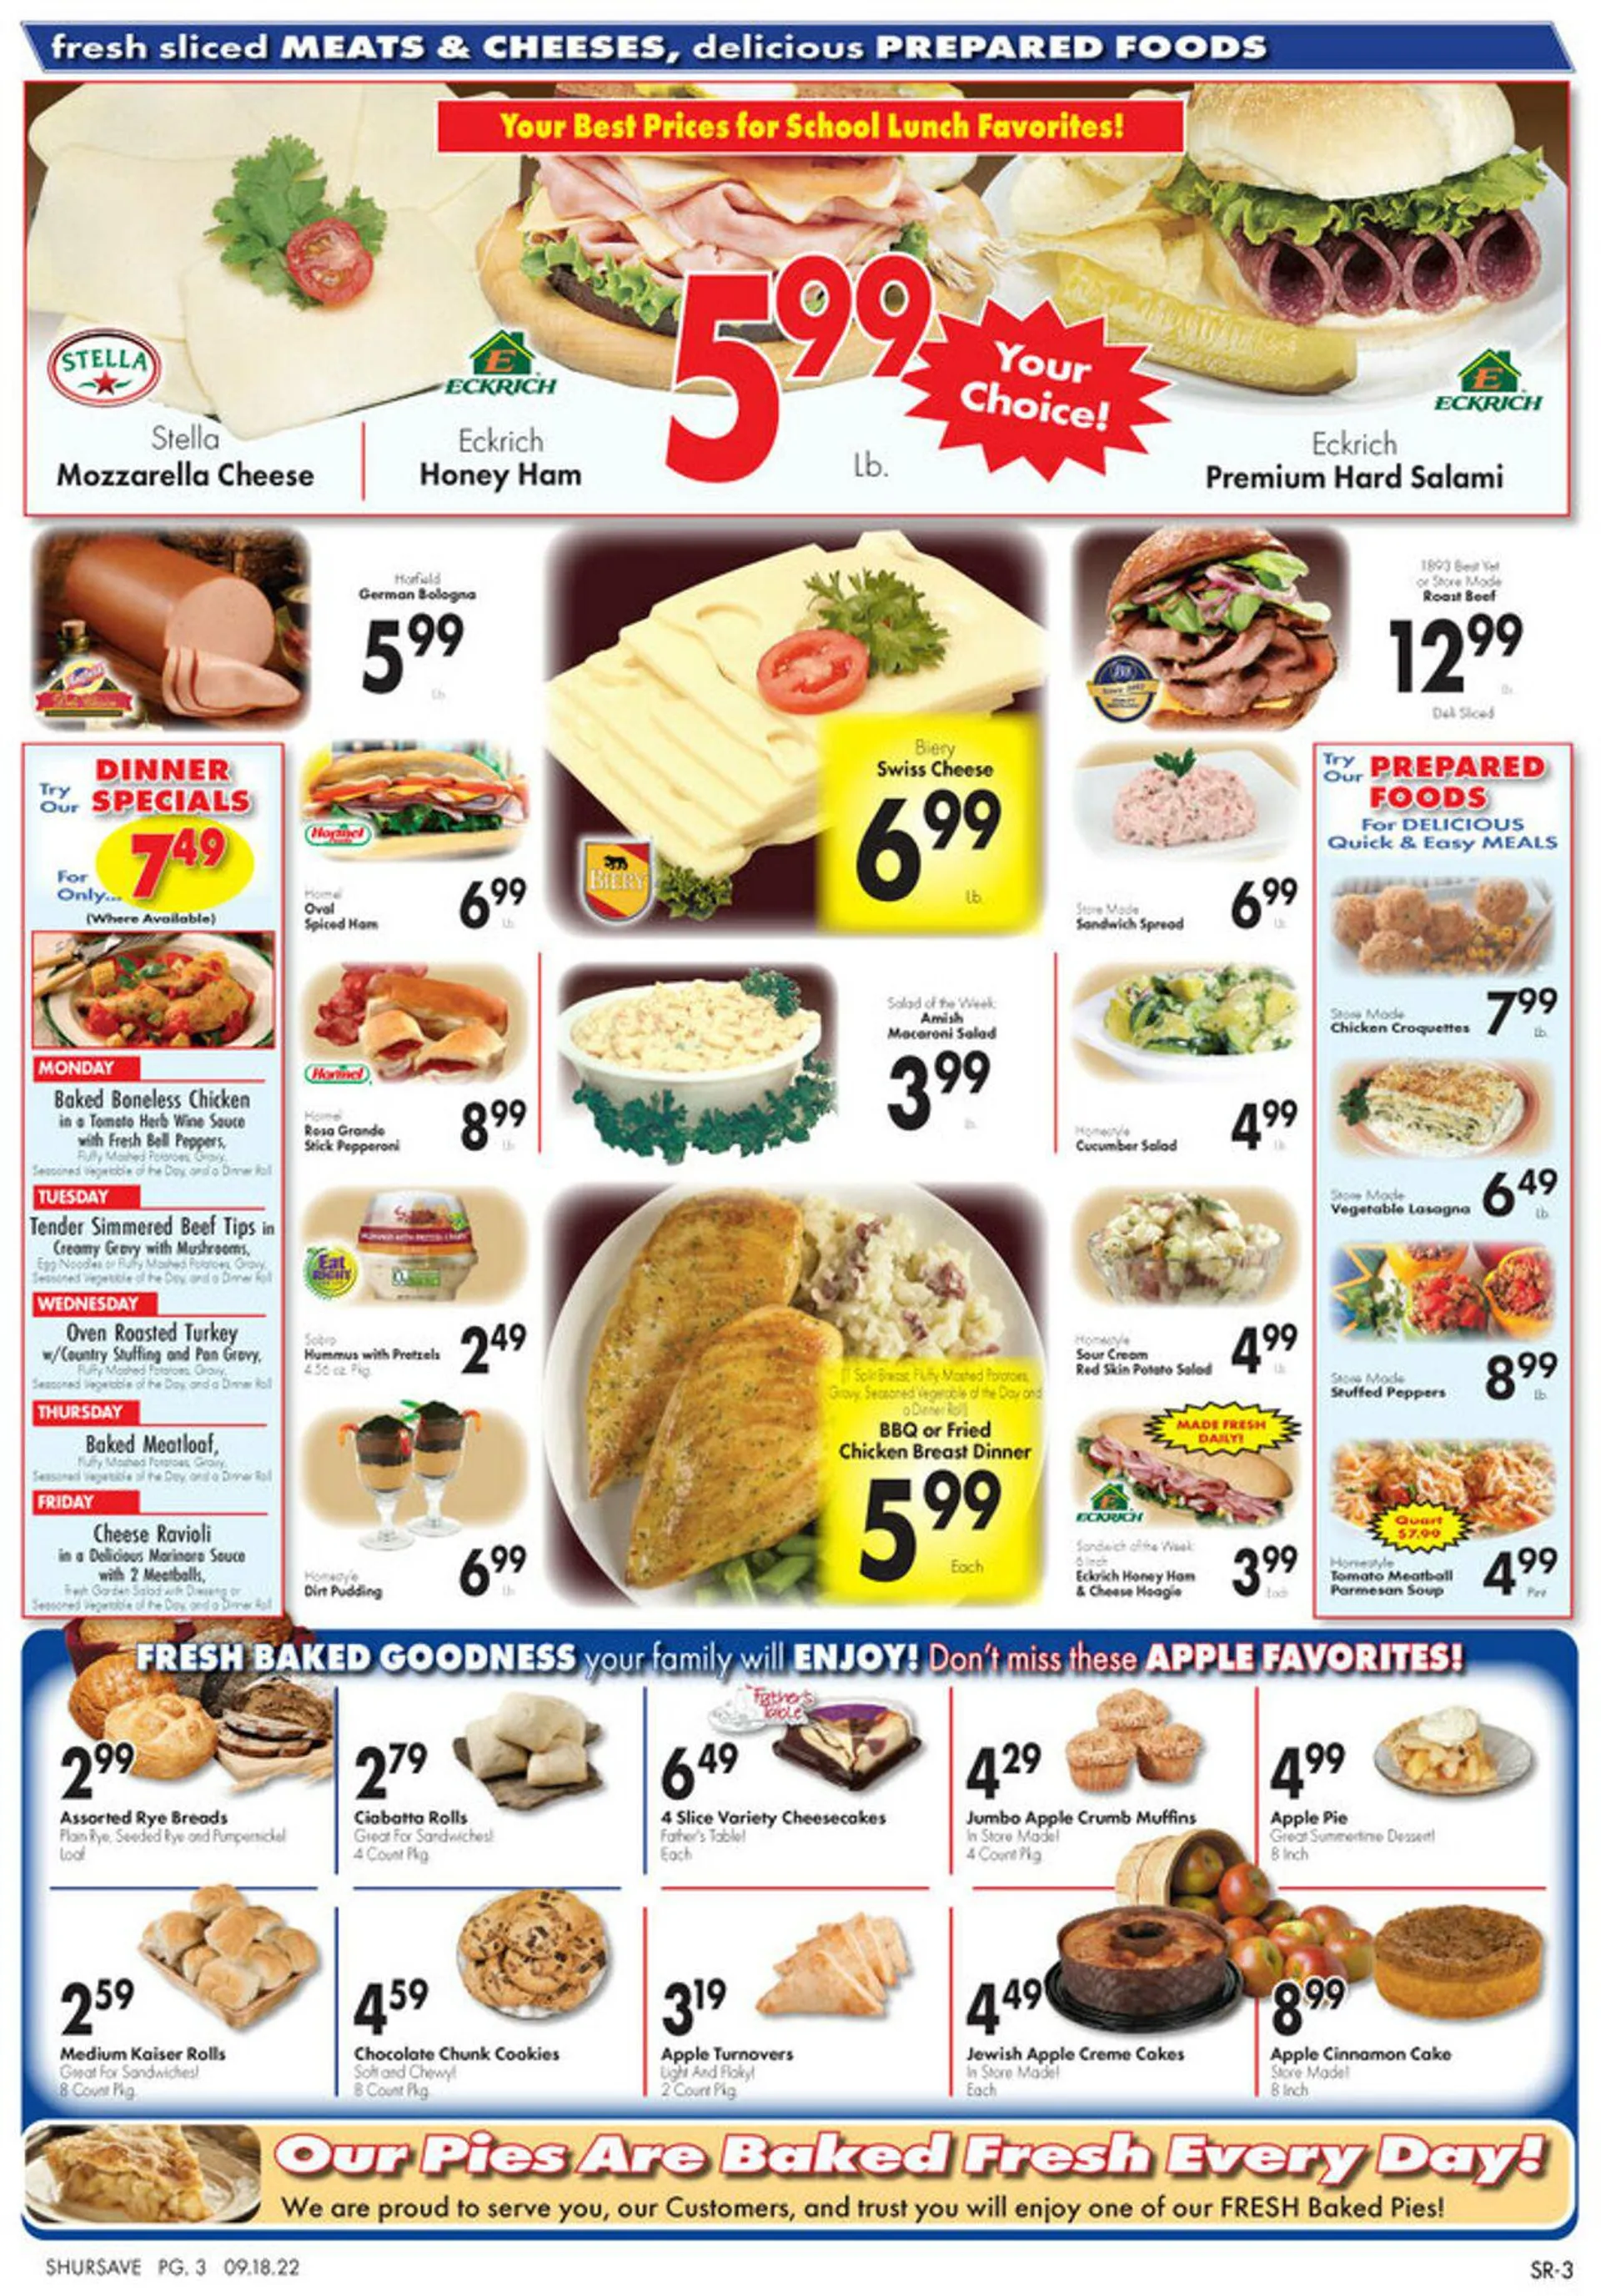 Gerritys Supermarkets Current weekly ad - 4